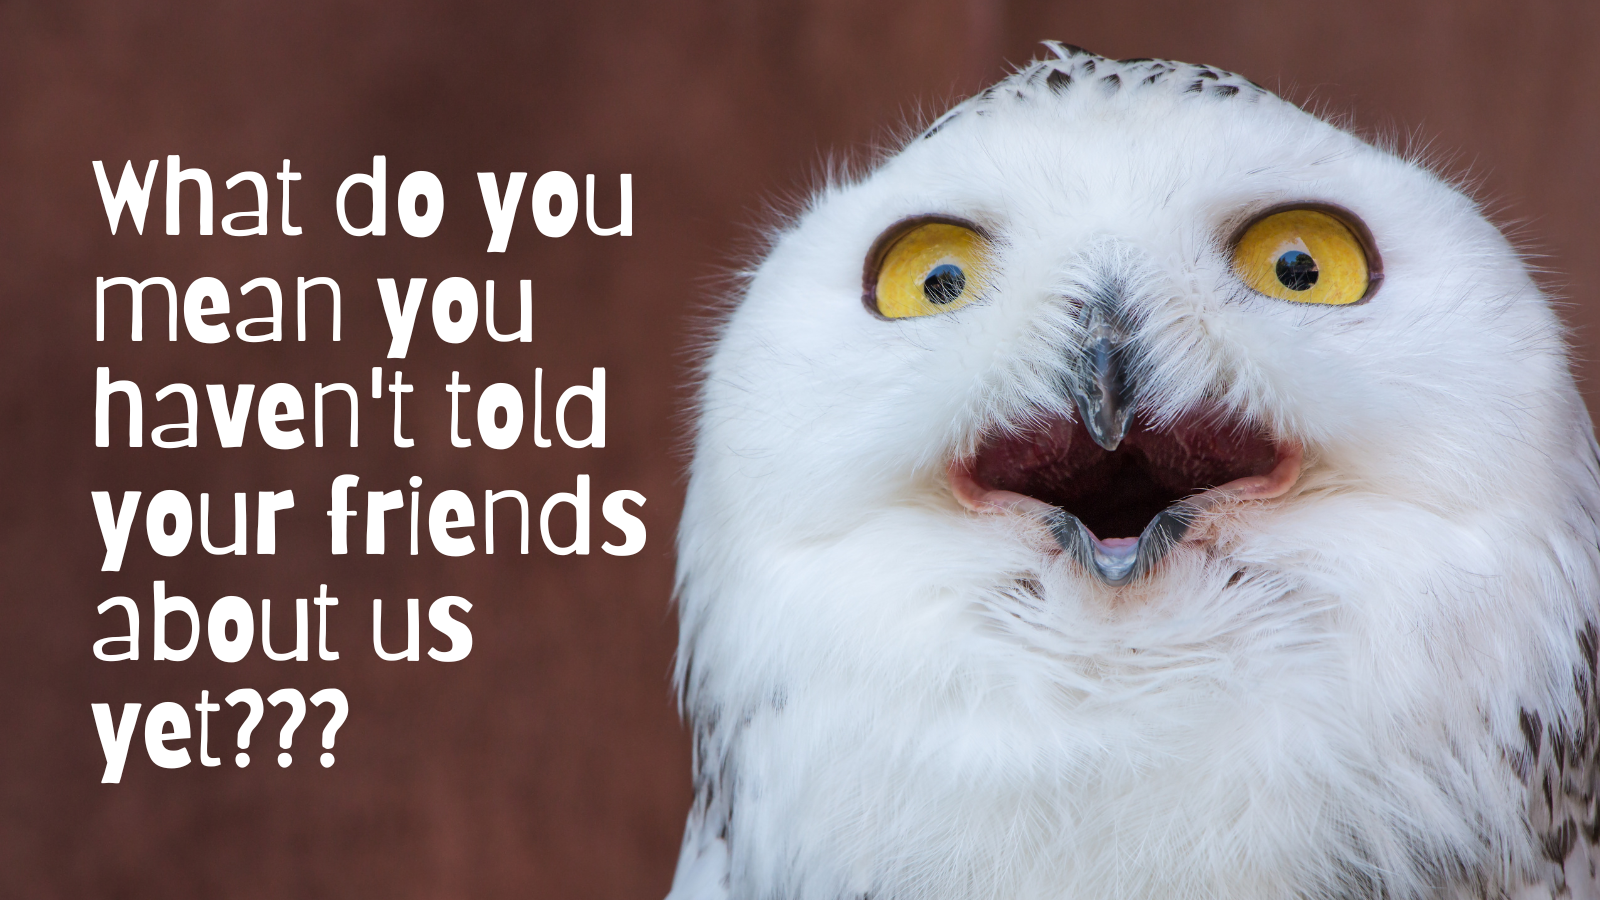 What do you mean you haven't told your friends about us? - Surprised Owl